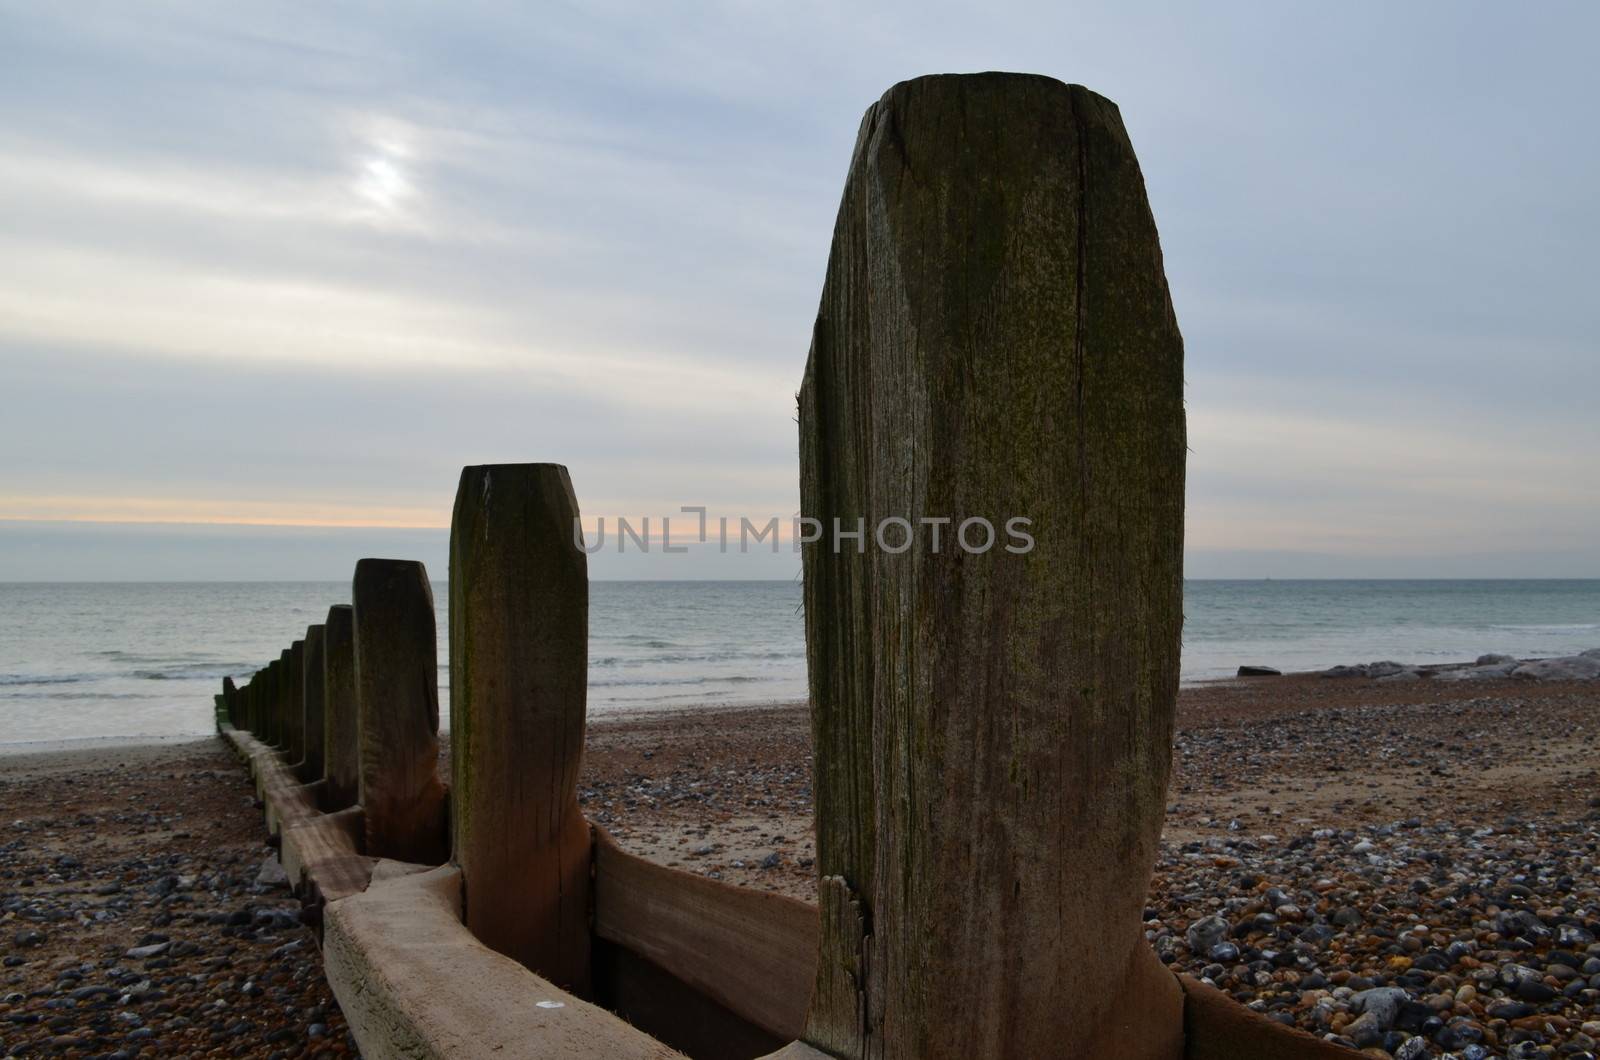 Wooden breakwater sea defence along a beach in South East coast of England.Image taken in November 2013.